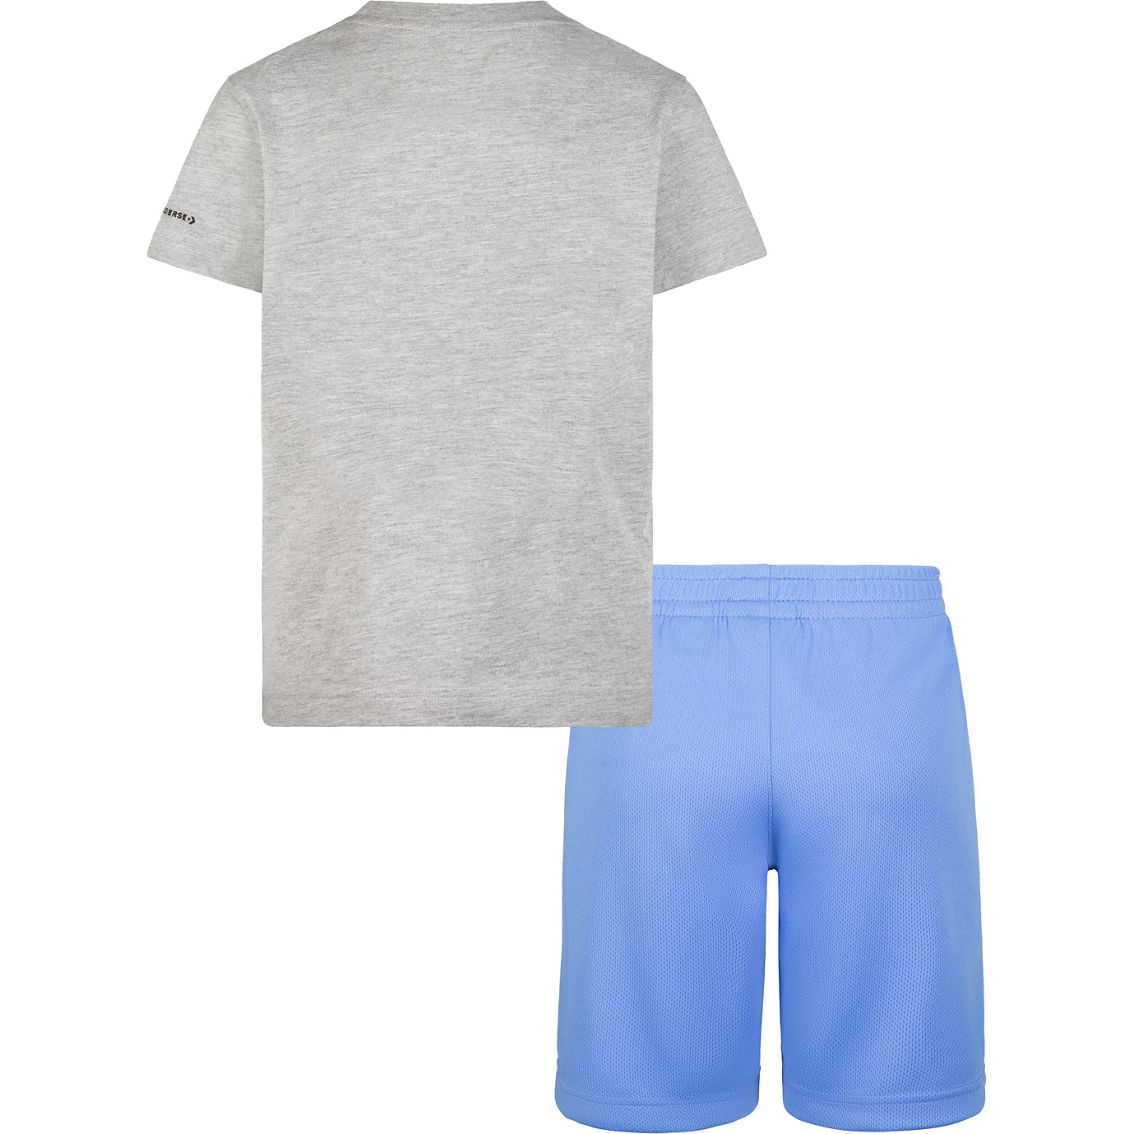 Converse Little Boys Frozen Friends Tee and Mesh Shorts 2 pc. Set - Image 2 of 3